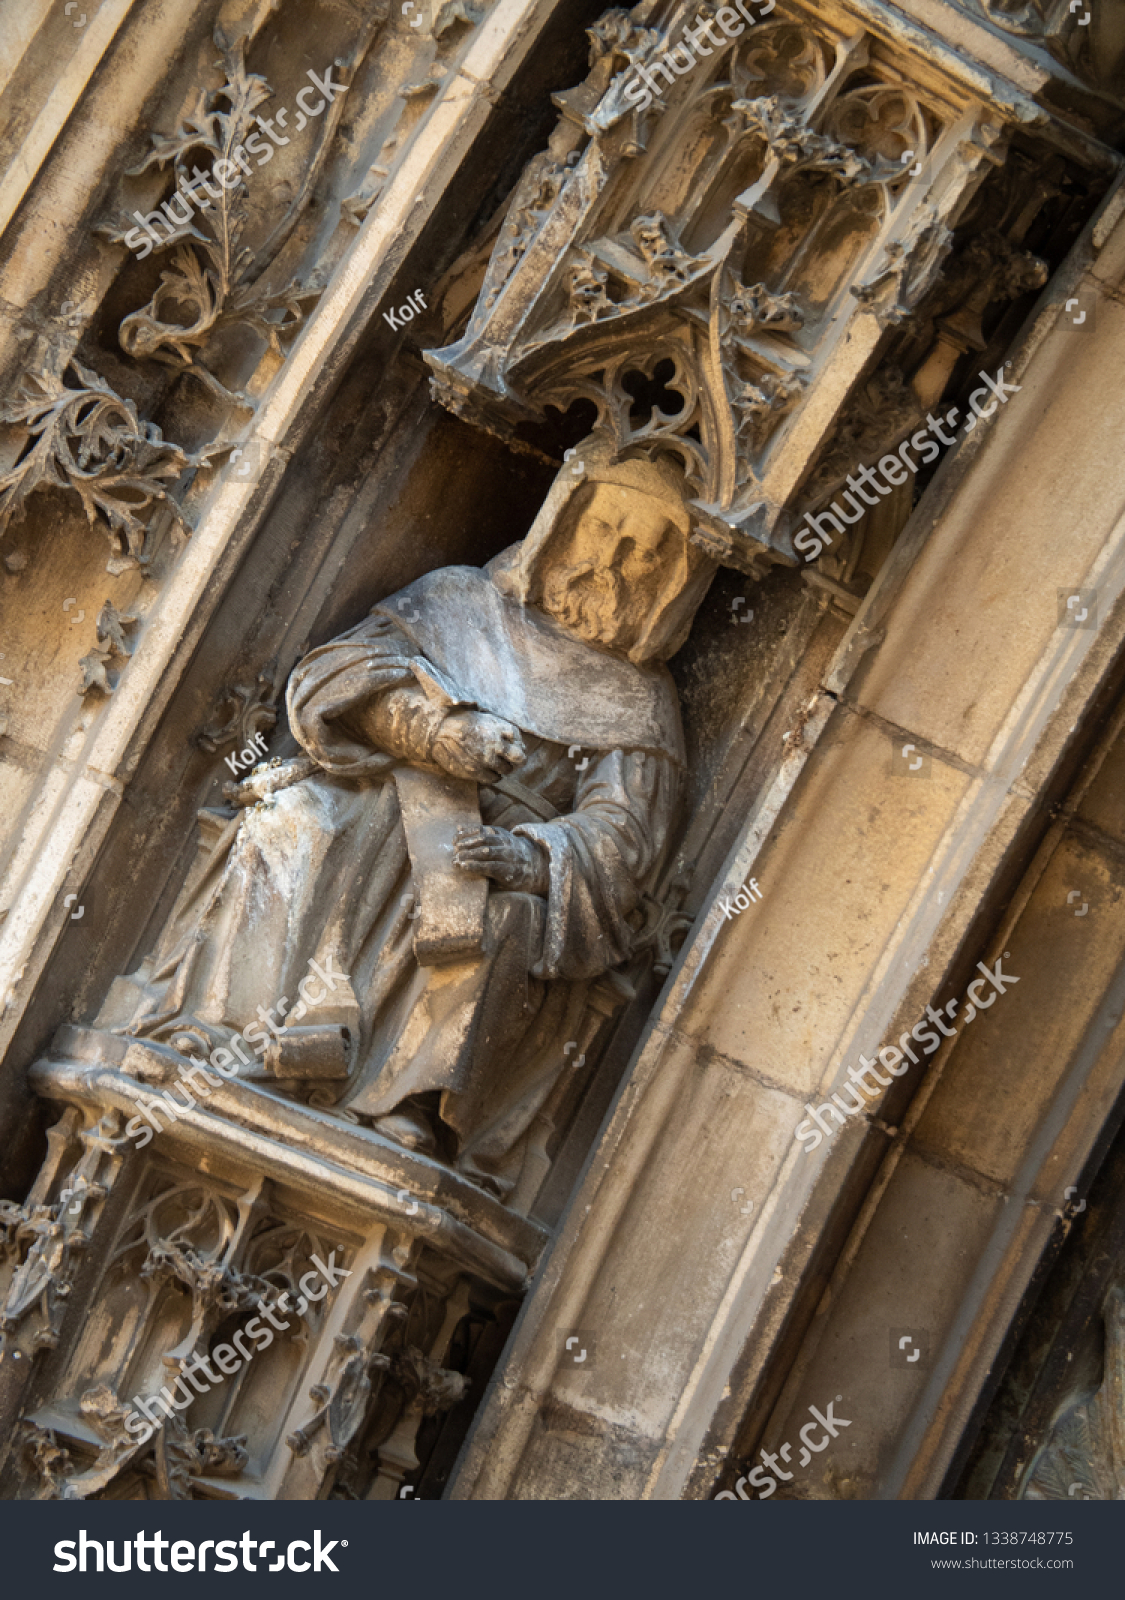 Close up of statue decorated at entrance of Aix Cathedral (Cathédrale Saint-Sauveur d'Aix-en-Provence) in Aix-en-Provence. Aix Cathedral was Built and re-built from the 12th until the 19th century. #1338748775